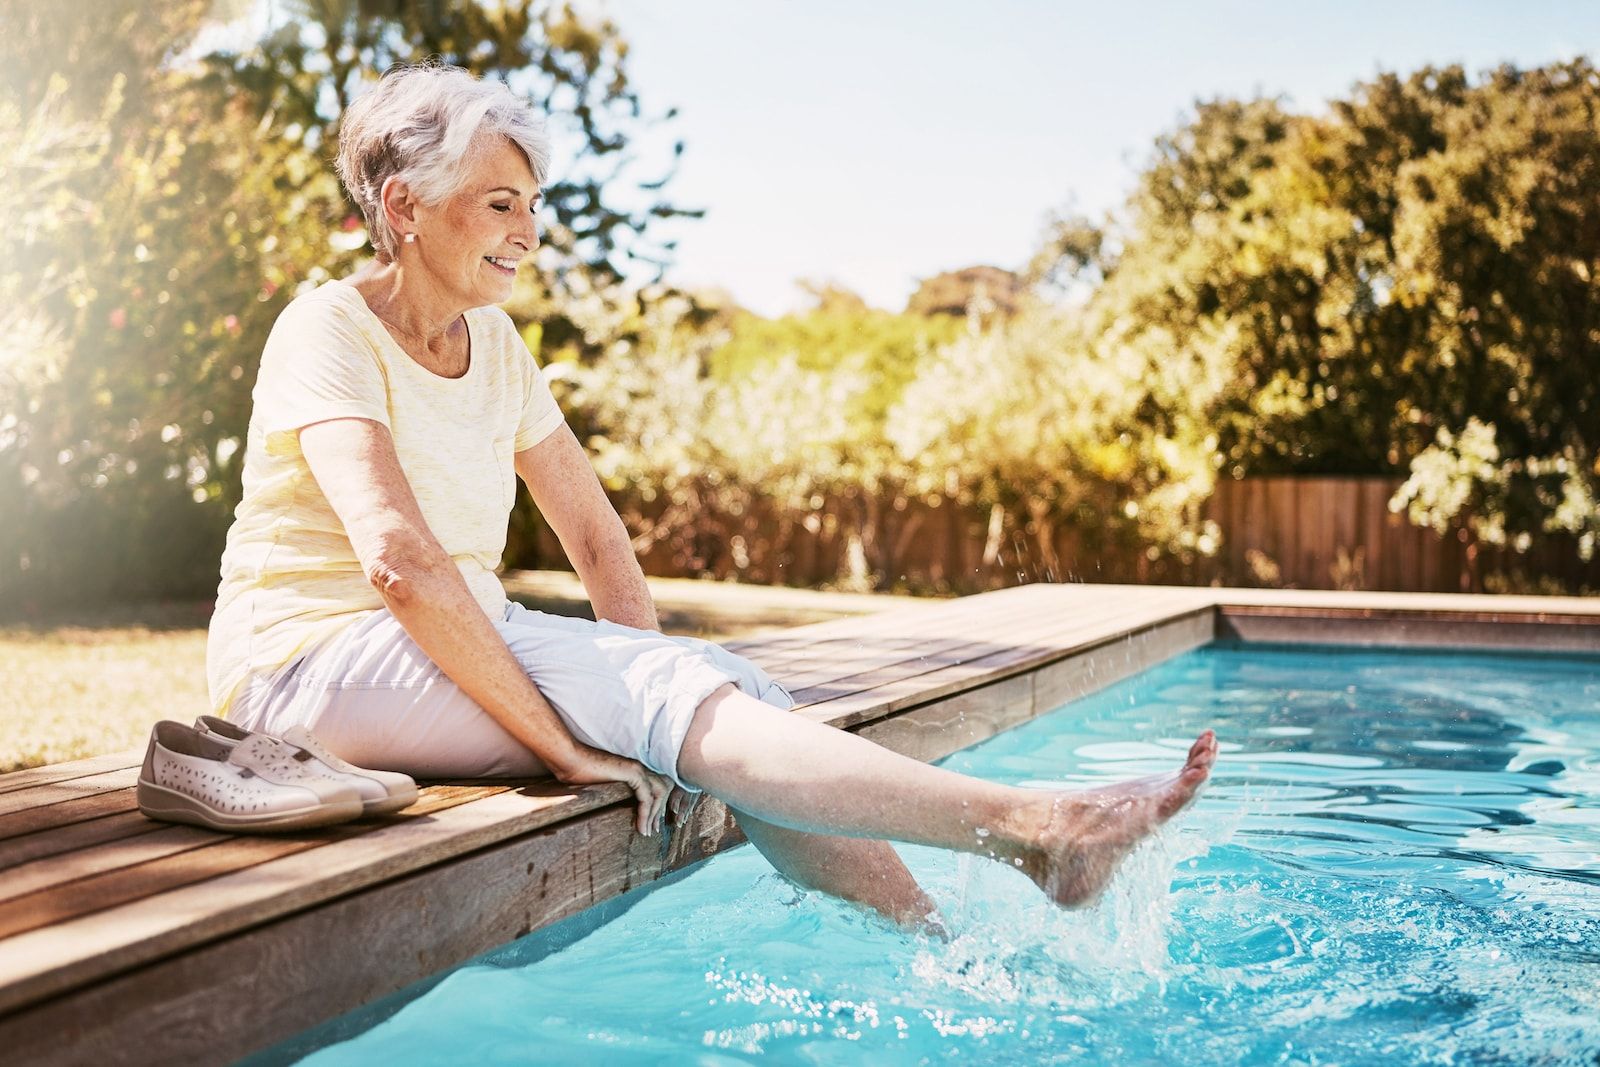 Summer safety tips for seniors: How to help older adults stay healthy when it’s hot outside